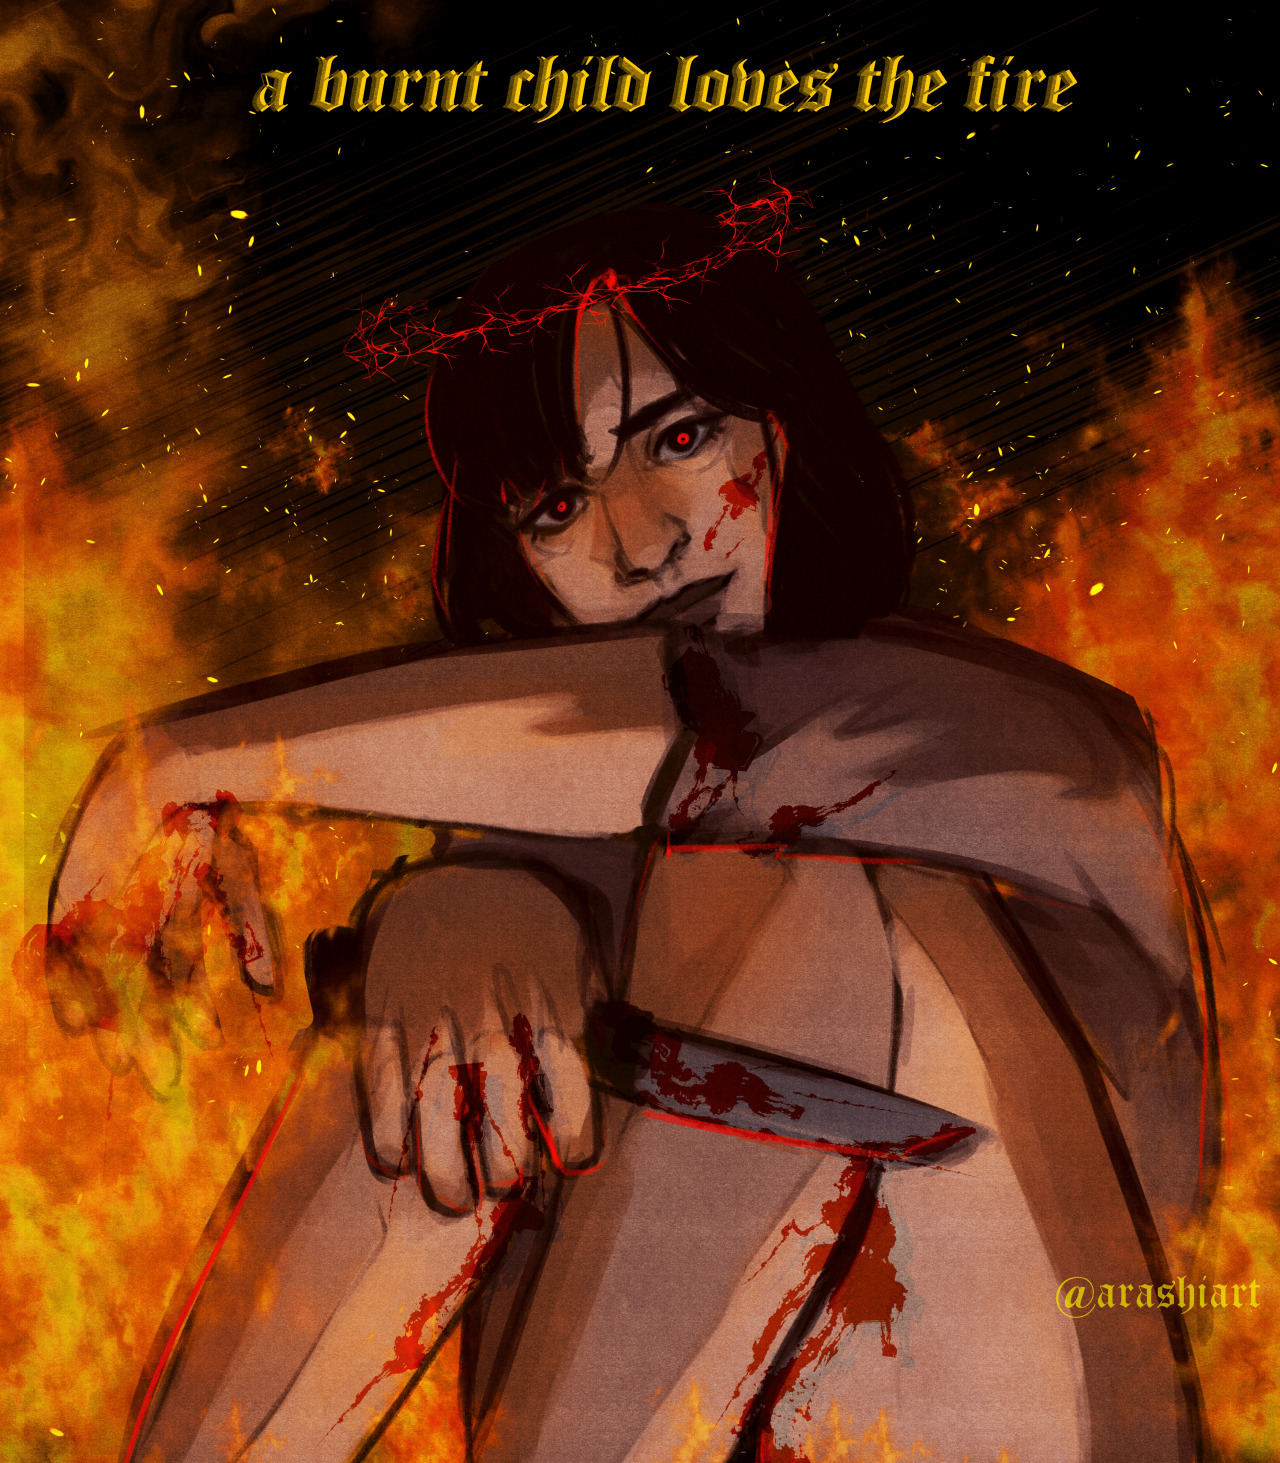 a burnt child loves the fire.[commissions open - my ig] #redraw almost a year later!!  #this was the first illustration i made in my new art style :>  #the old one is on my ig uwu #silent hill #silent hill 2 #angela orosco#sh2#konami #artist on tumblr  #artists on tumblr #my art#artist#art#fanart #silent hill fanart #horror art#blood tw#pyramid head#digital art#commissions open#commissions#creepy#creepy art#gore #silent hill angela